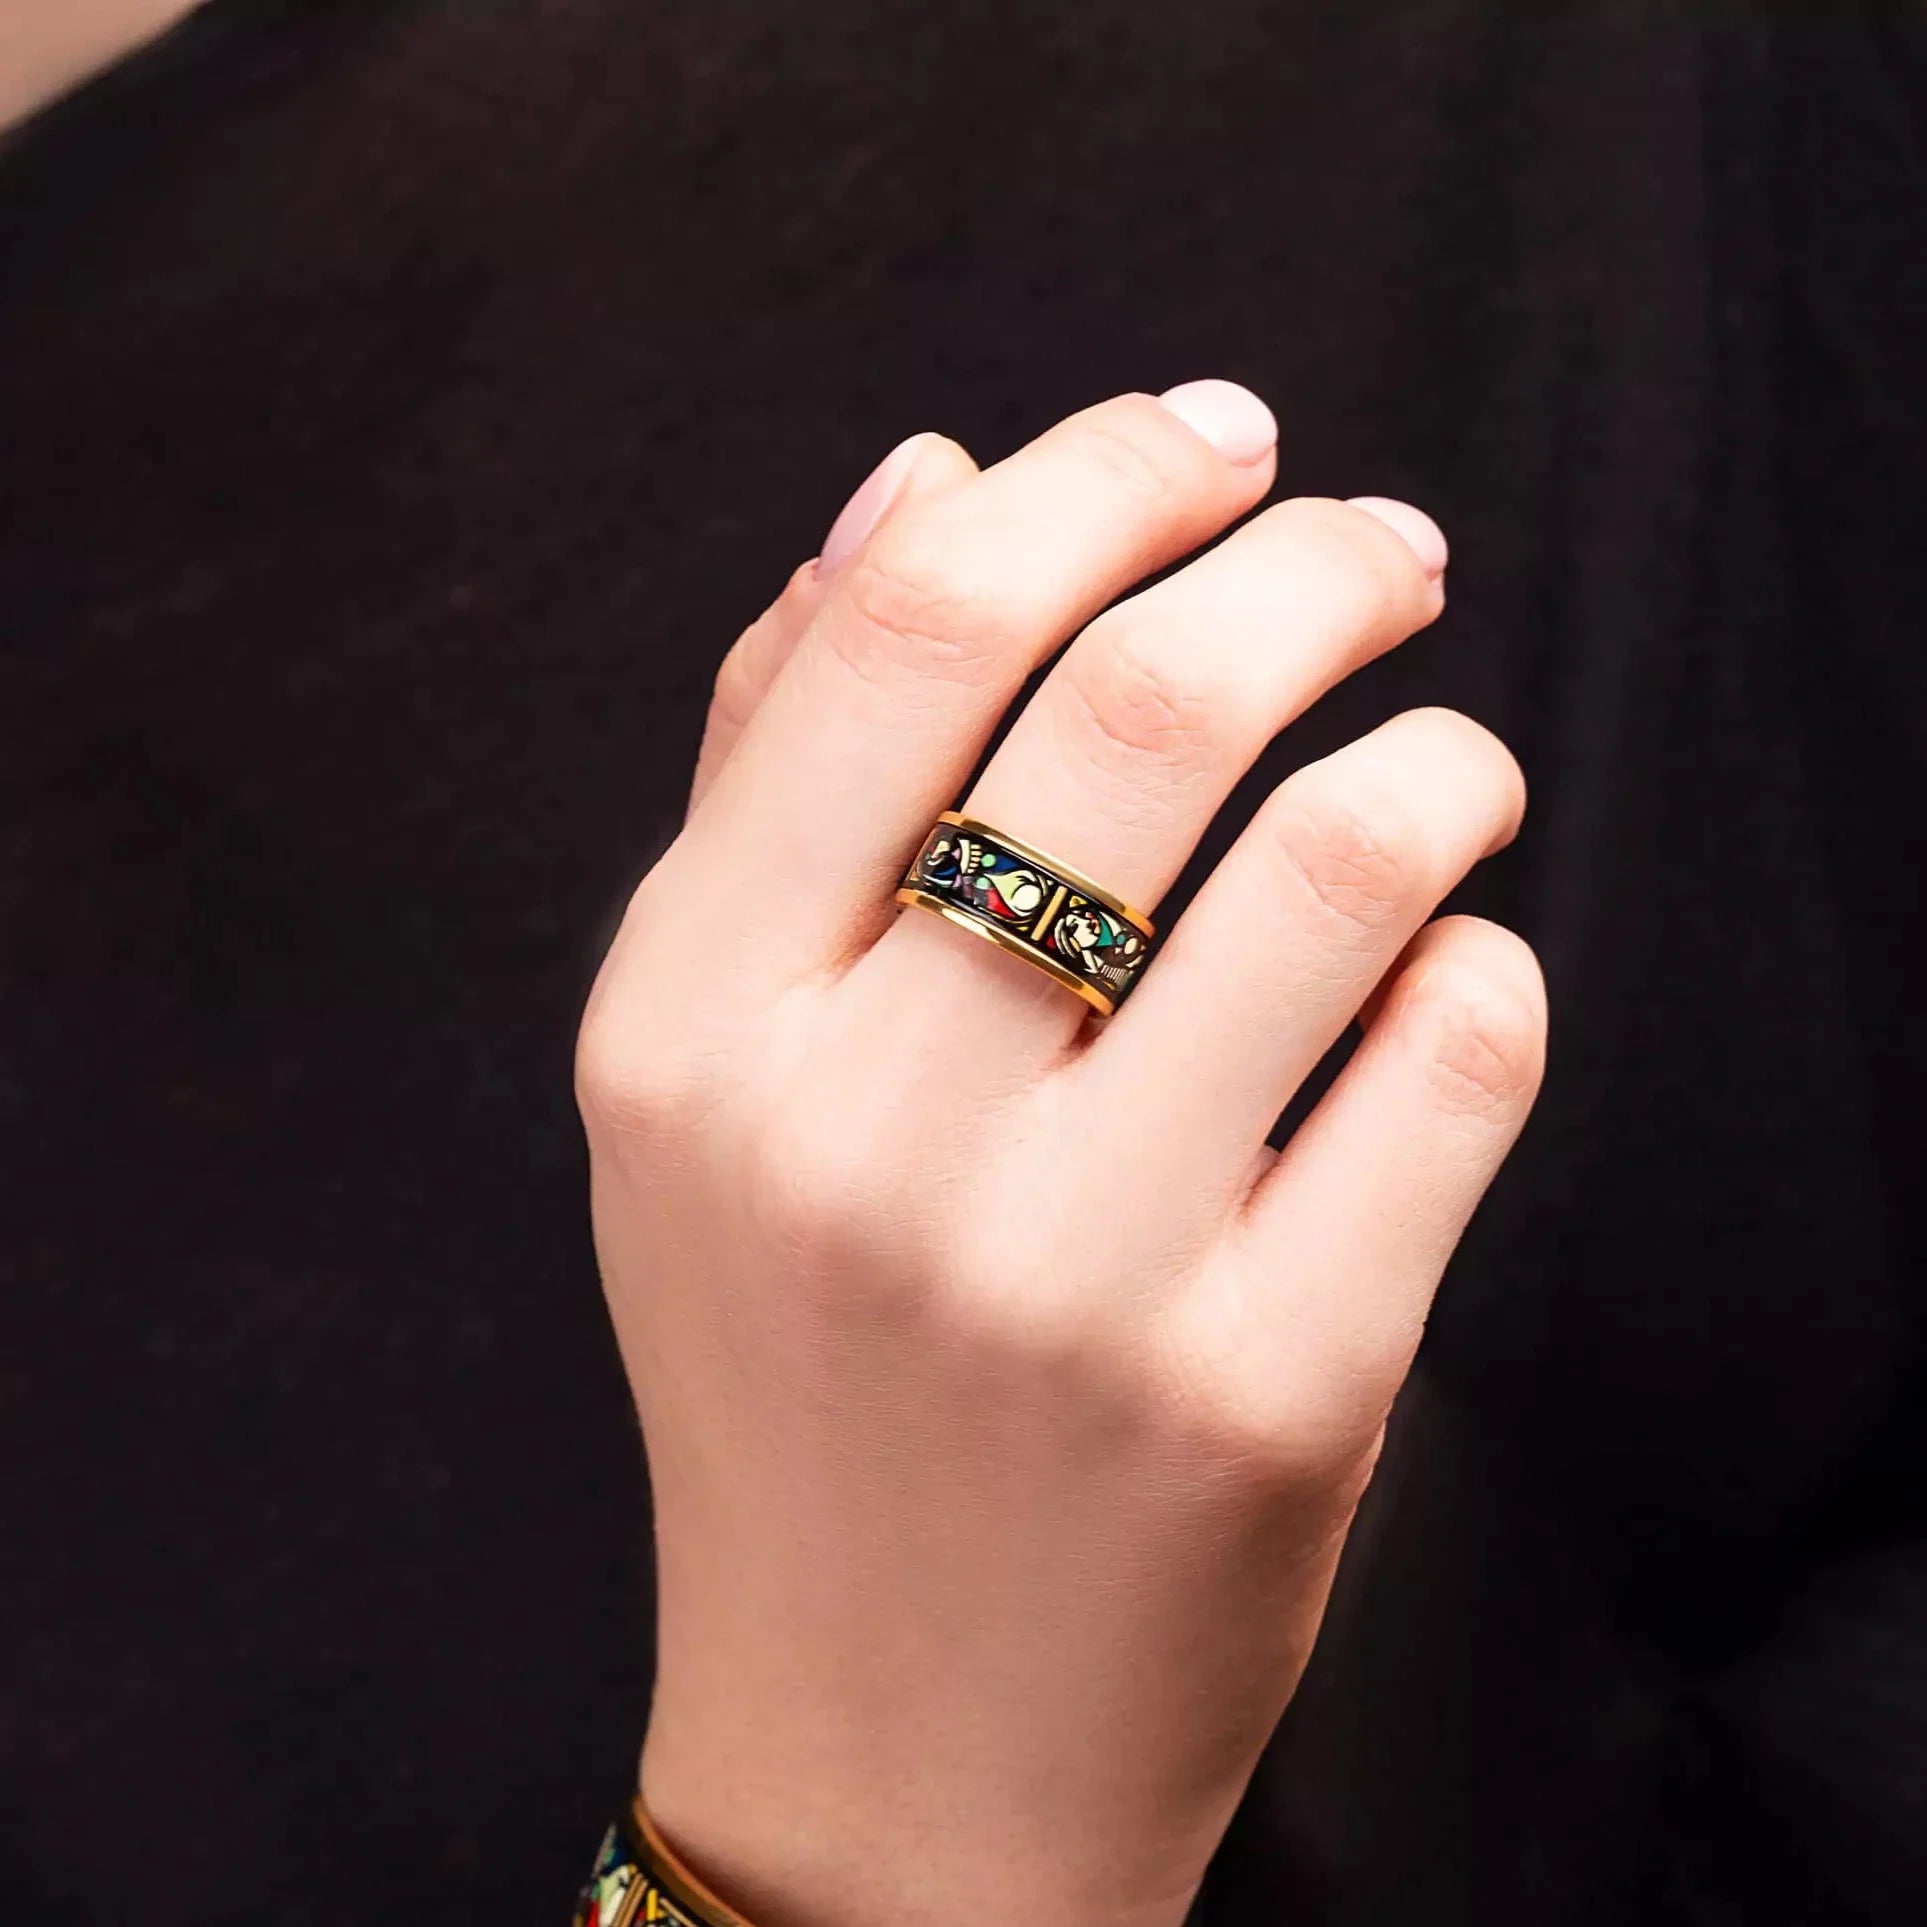 A hand with a bracelet and a ring from the Picasso's Secret collection.